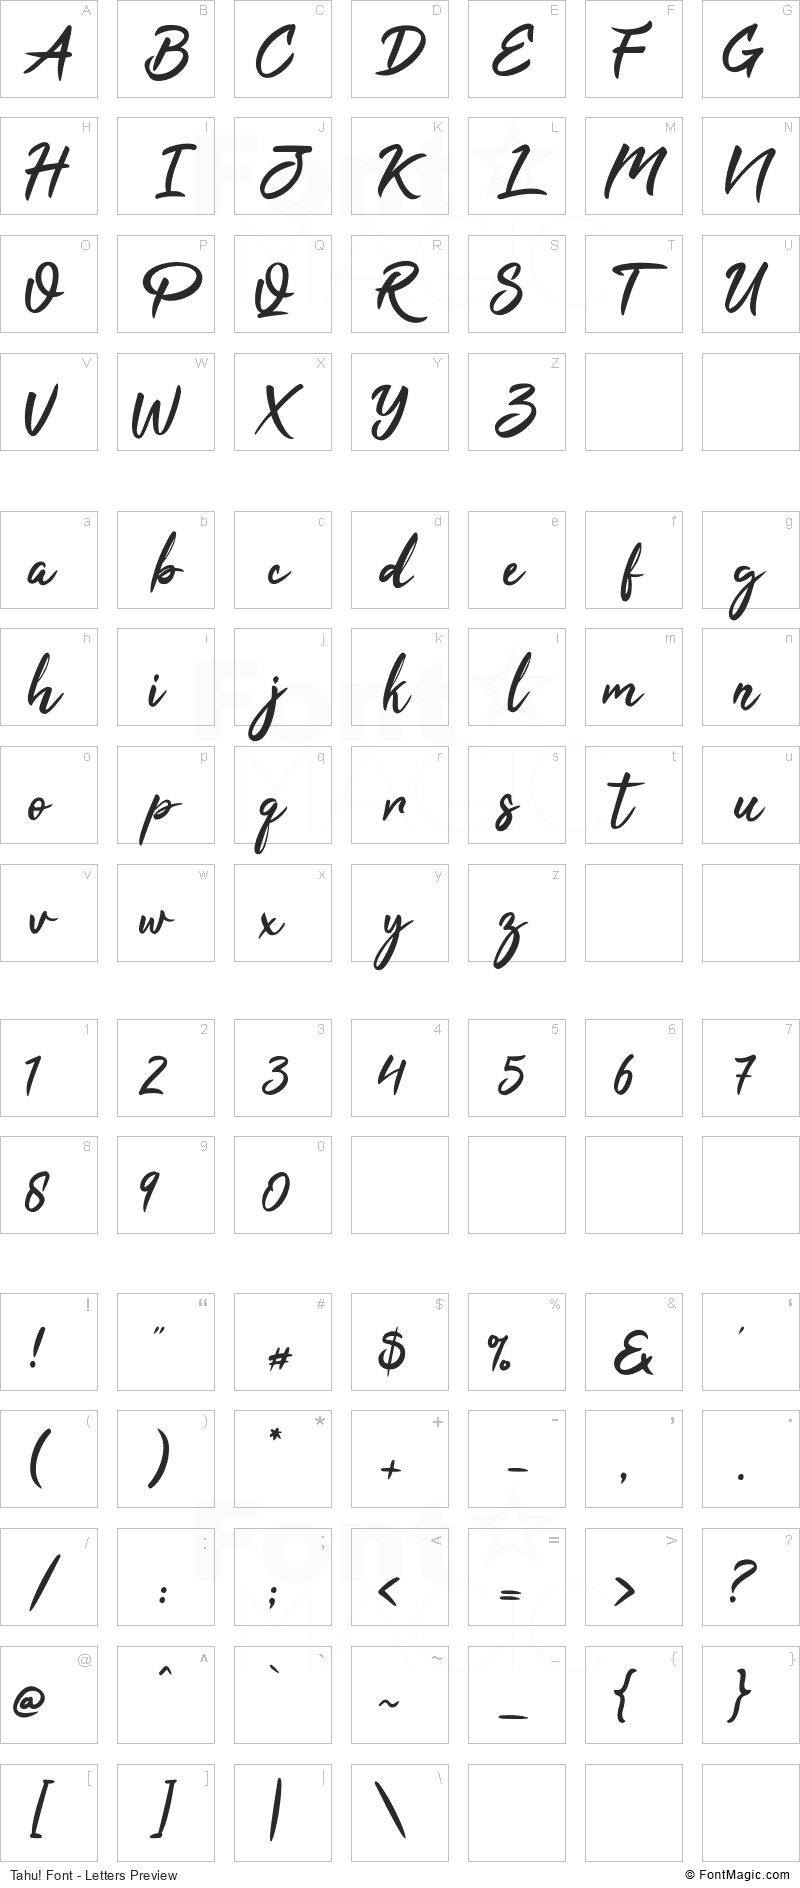 Tahu! Font - All Latters Preview Chart